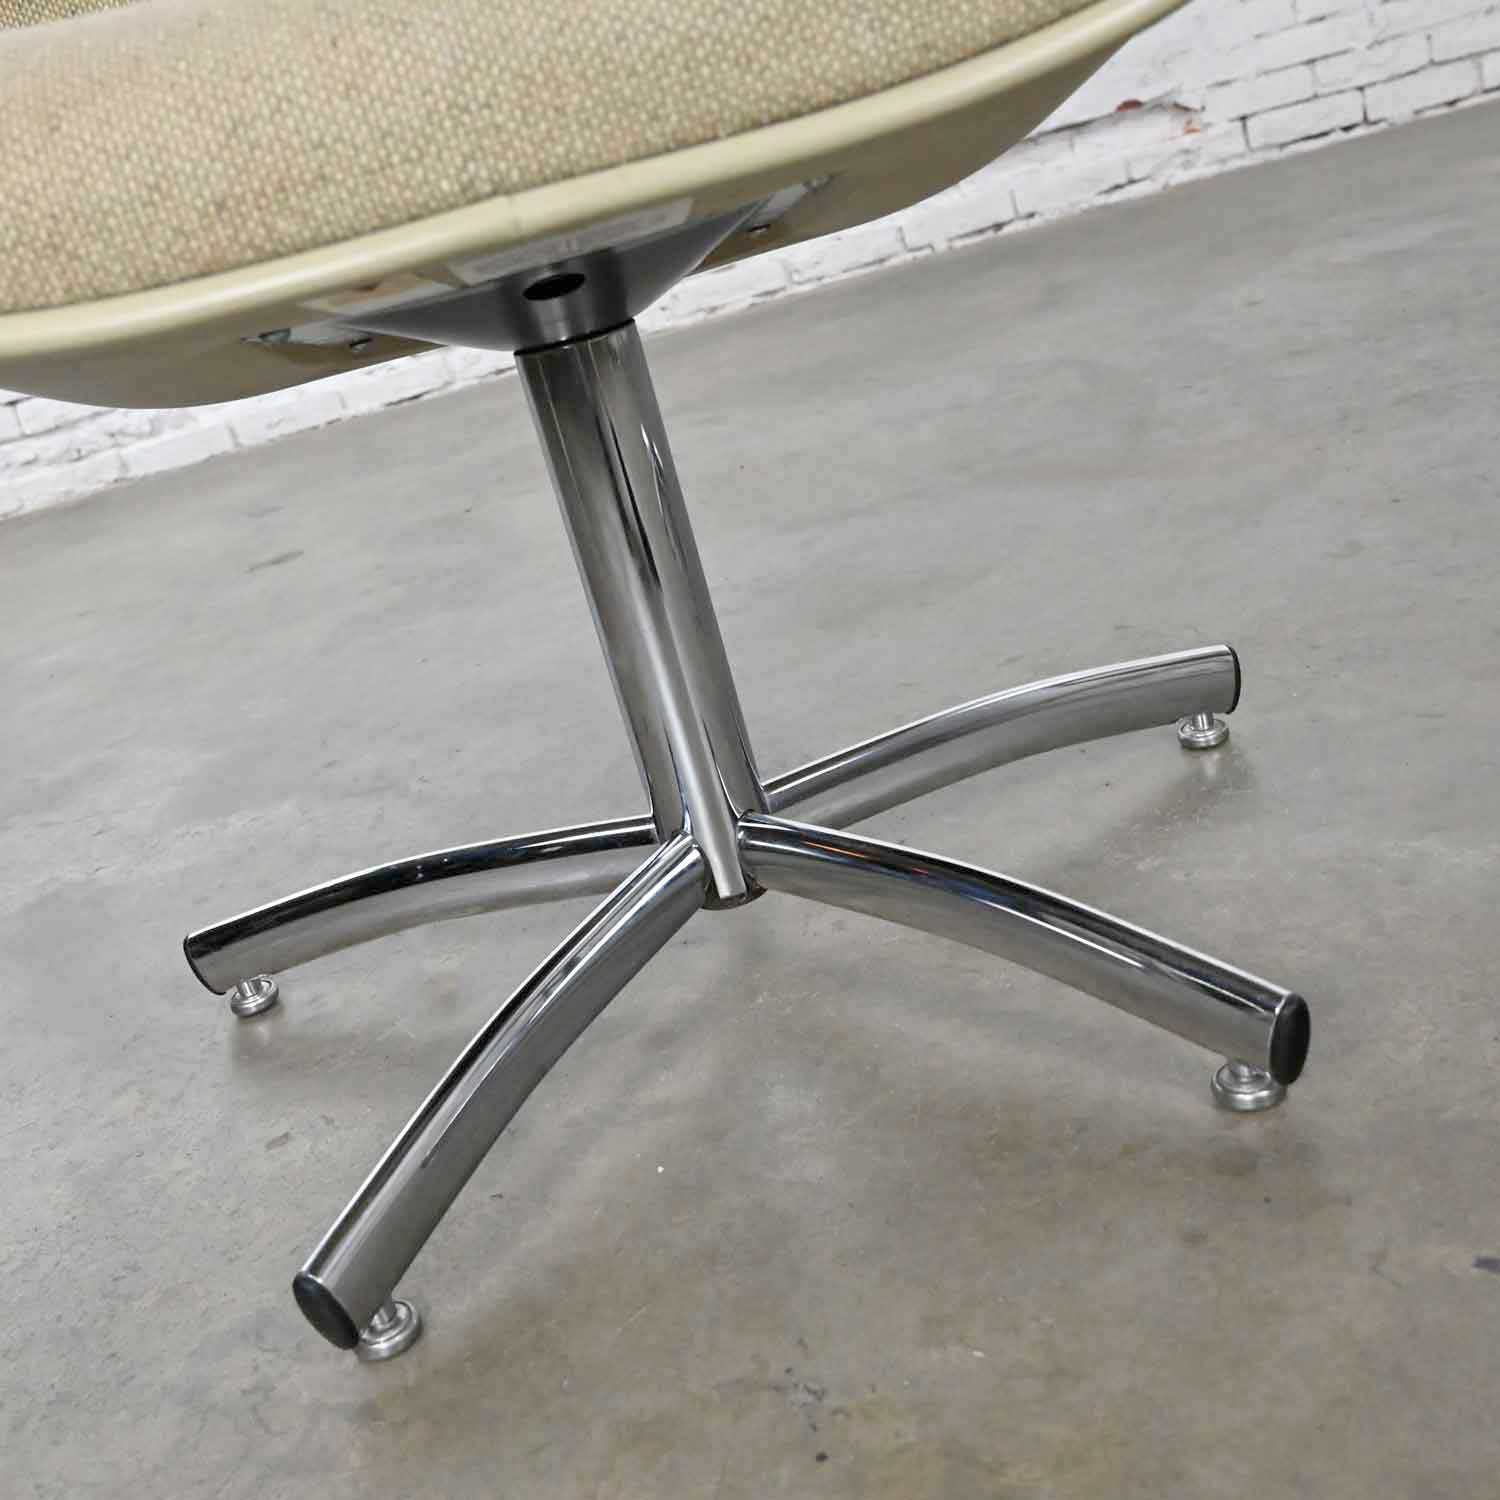 Modern Steelcase Model 451 5 Prong Chrome Base Oatmeal Fabric Office Chairs Style Charles Pollock a Pair